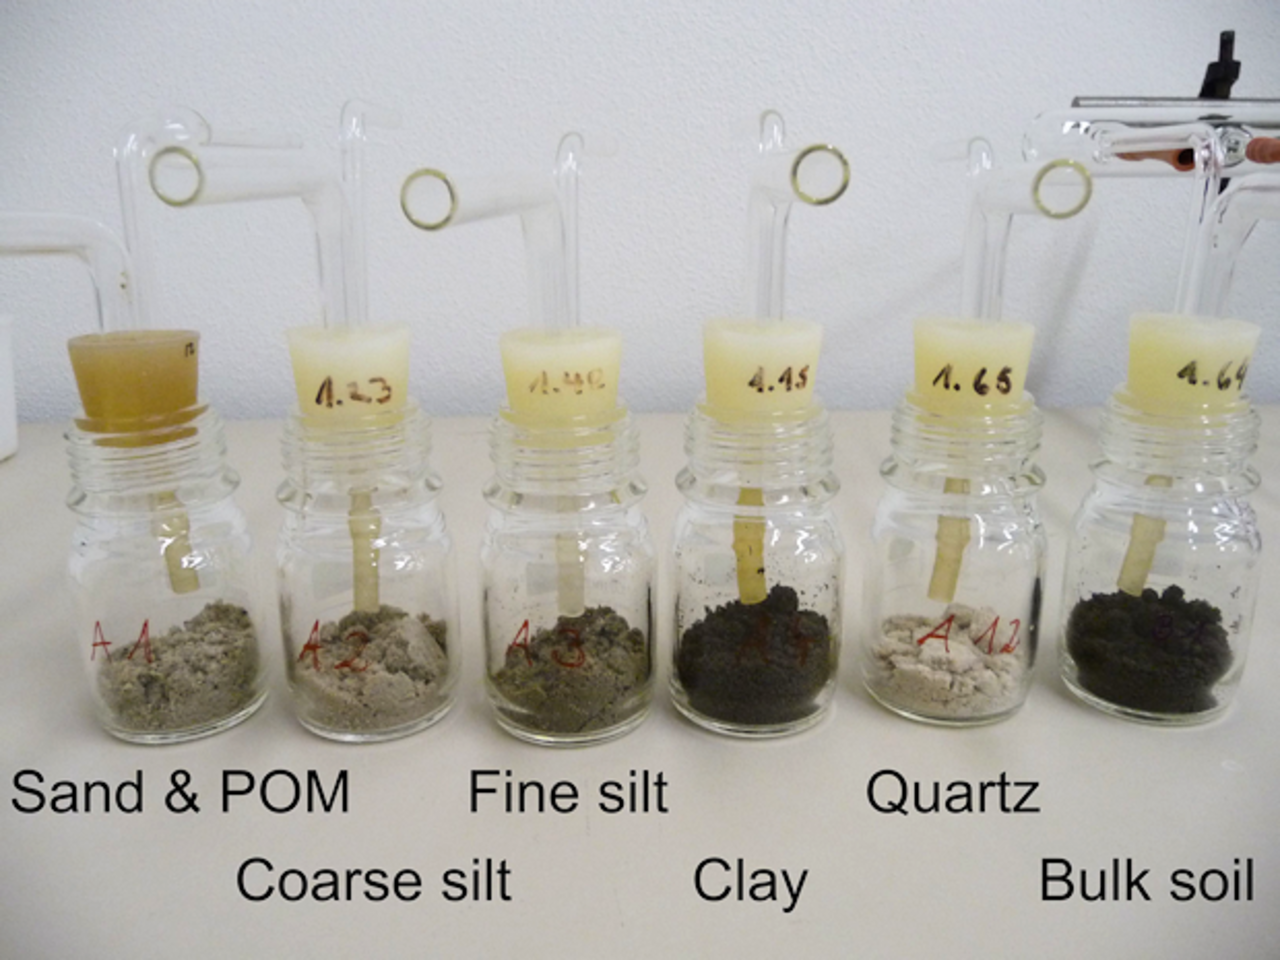 Flasks for analyzing the metabolism of particle-associated soil microorganisms